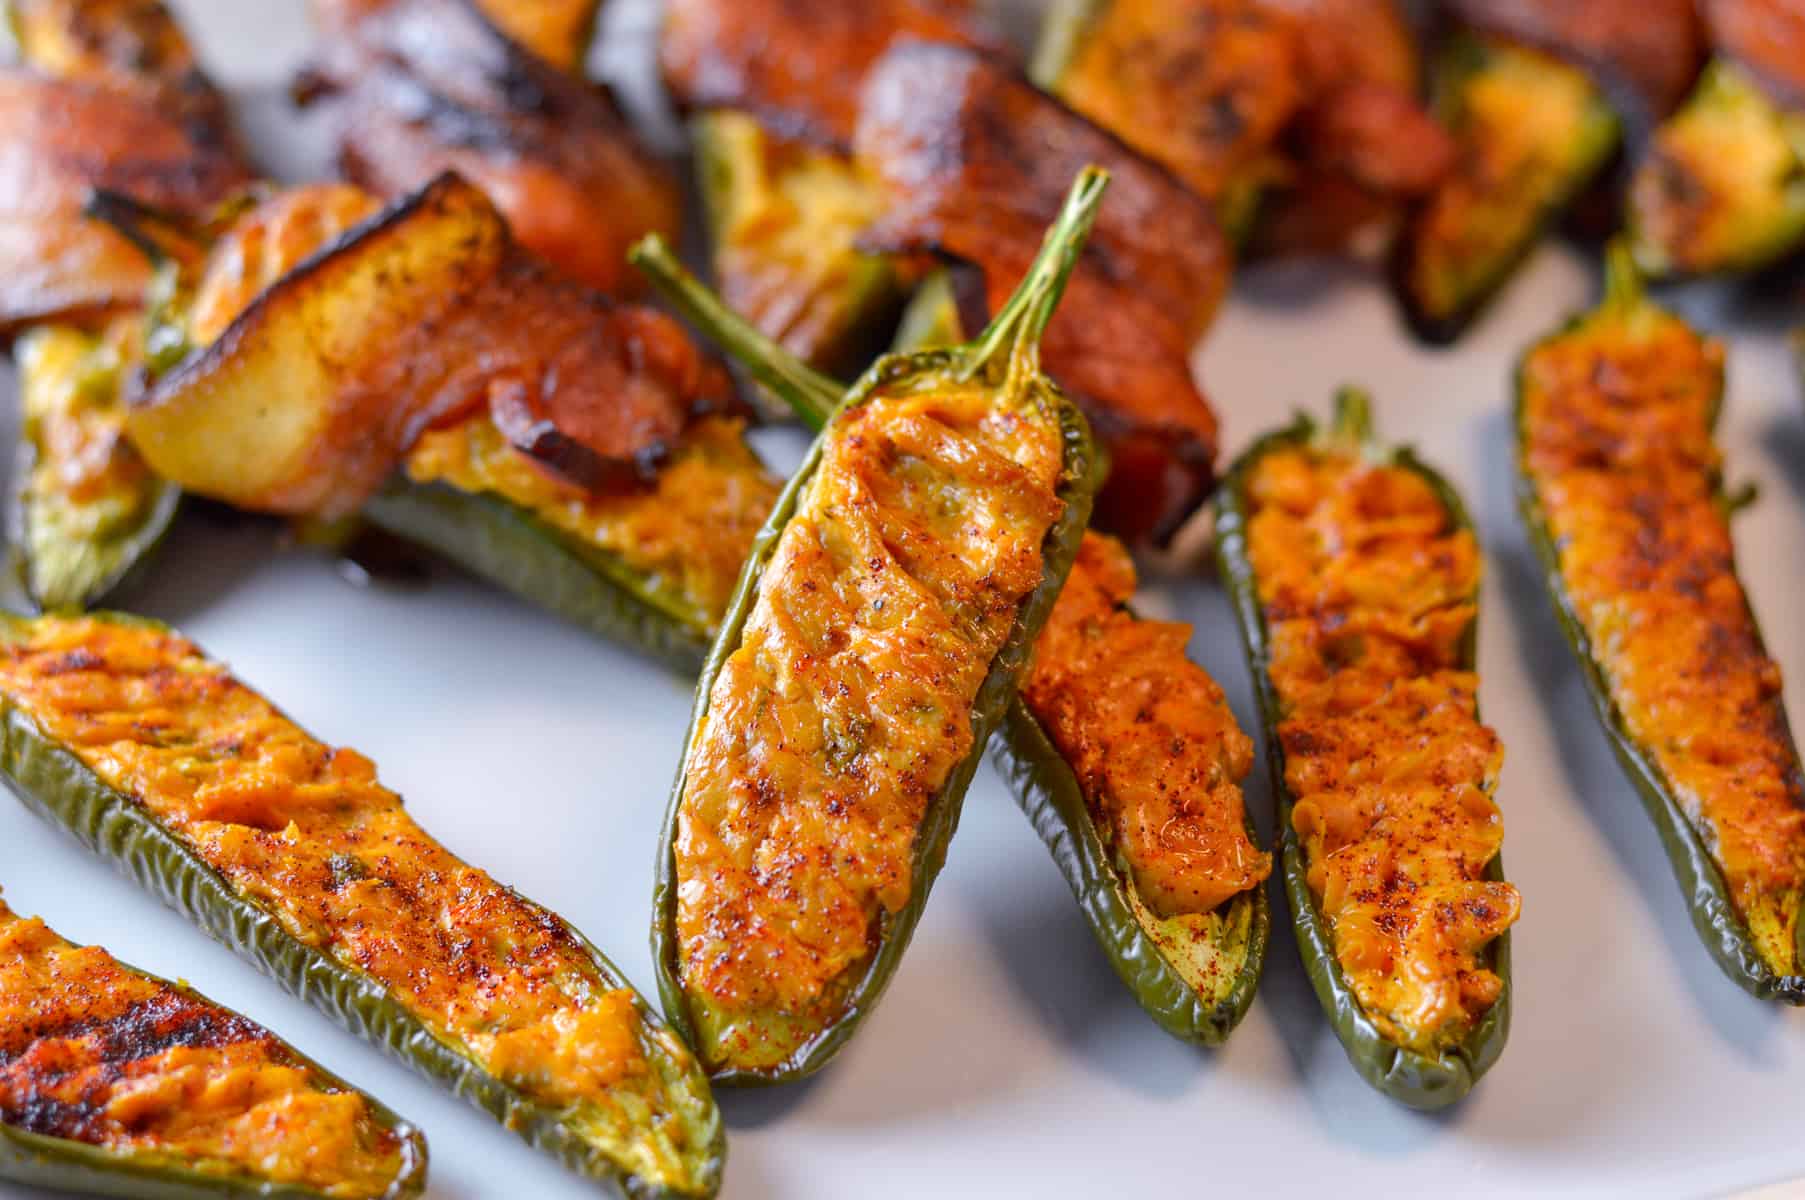 Plain jalapeno popper shown in front with bacon-wrapped in the background on a while platter